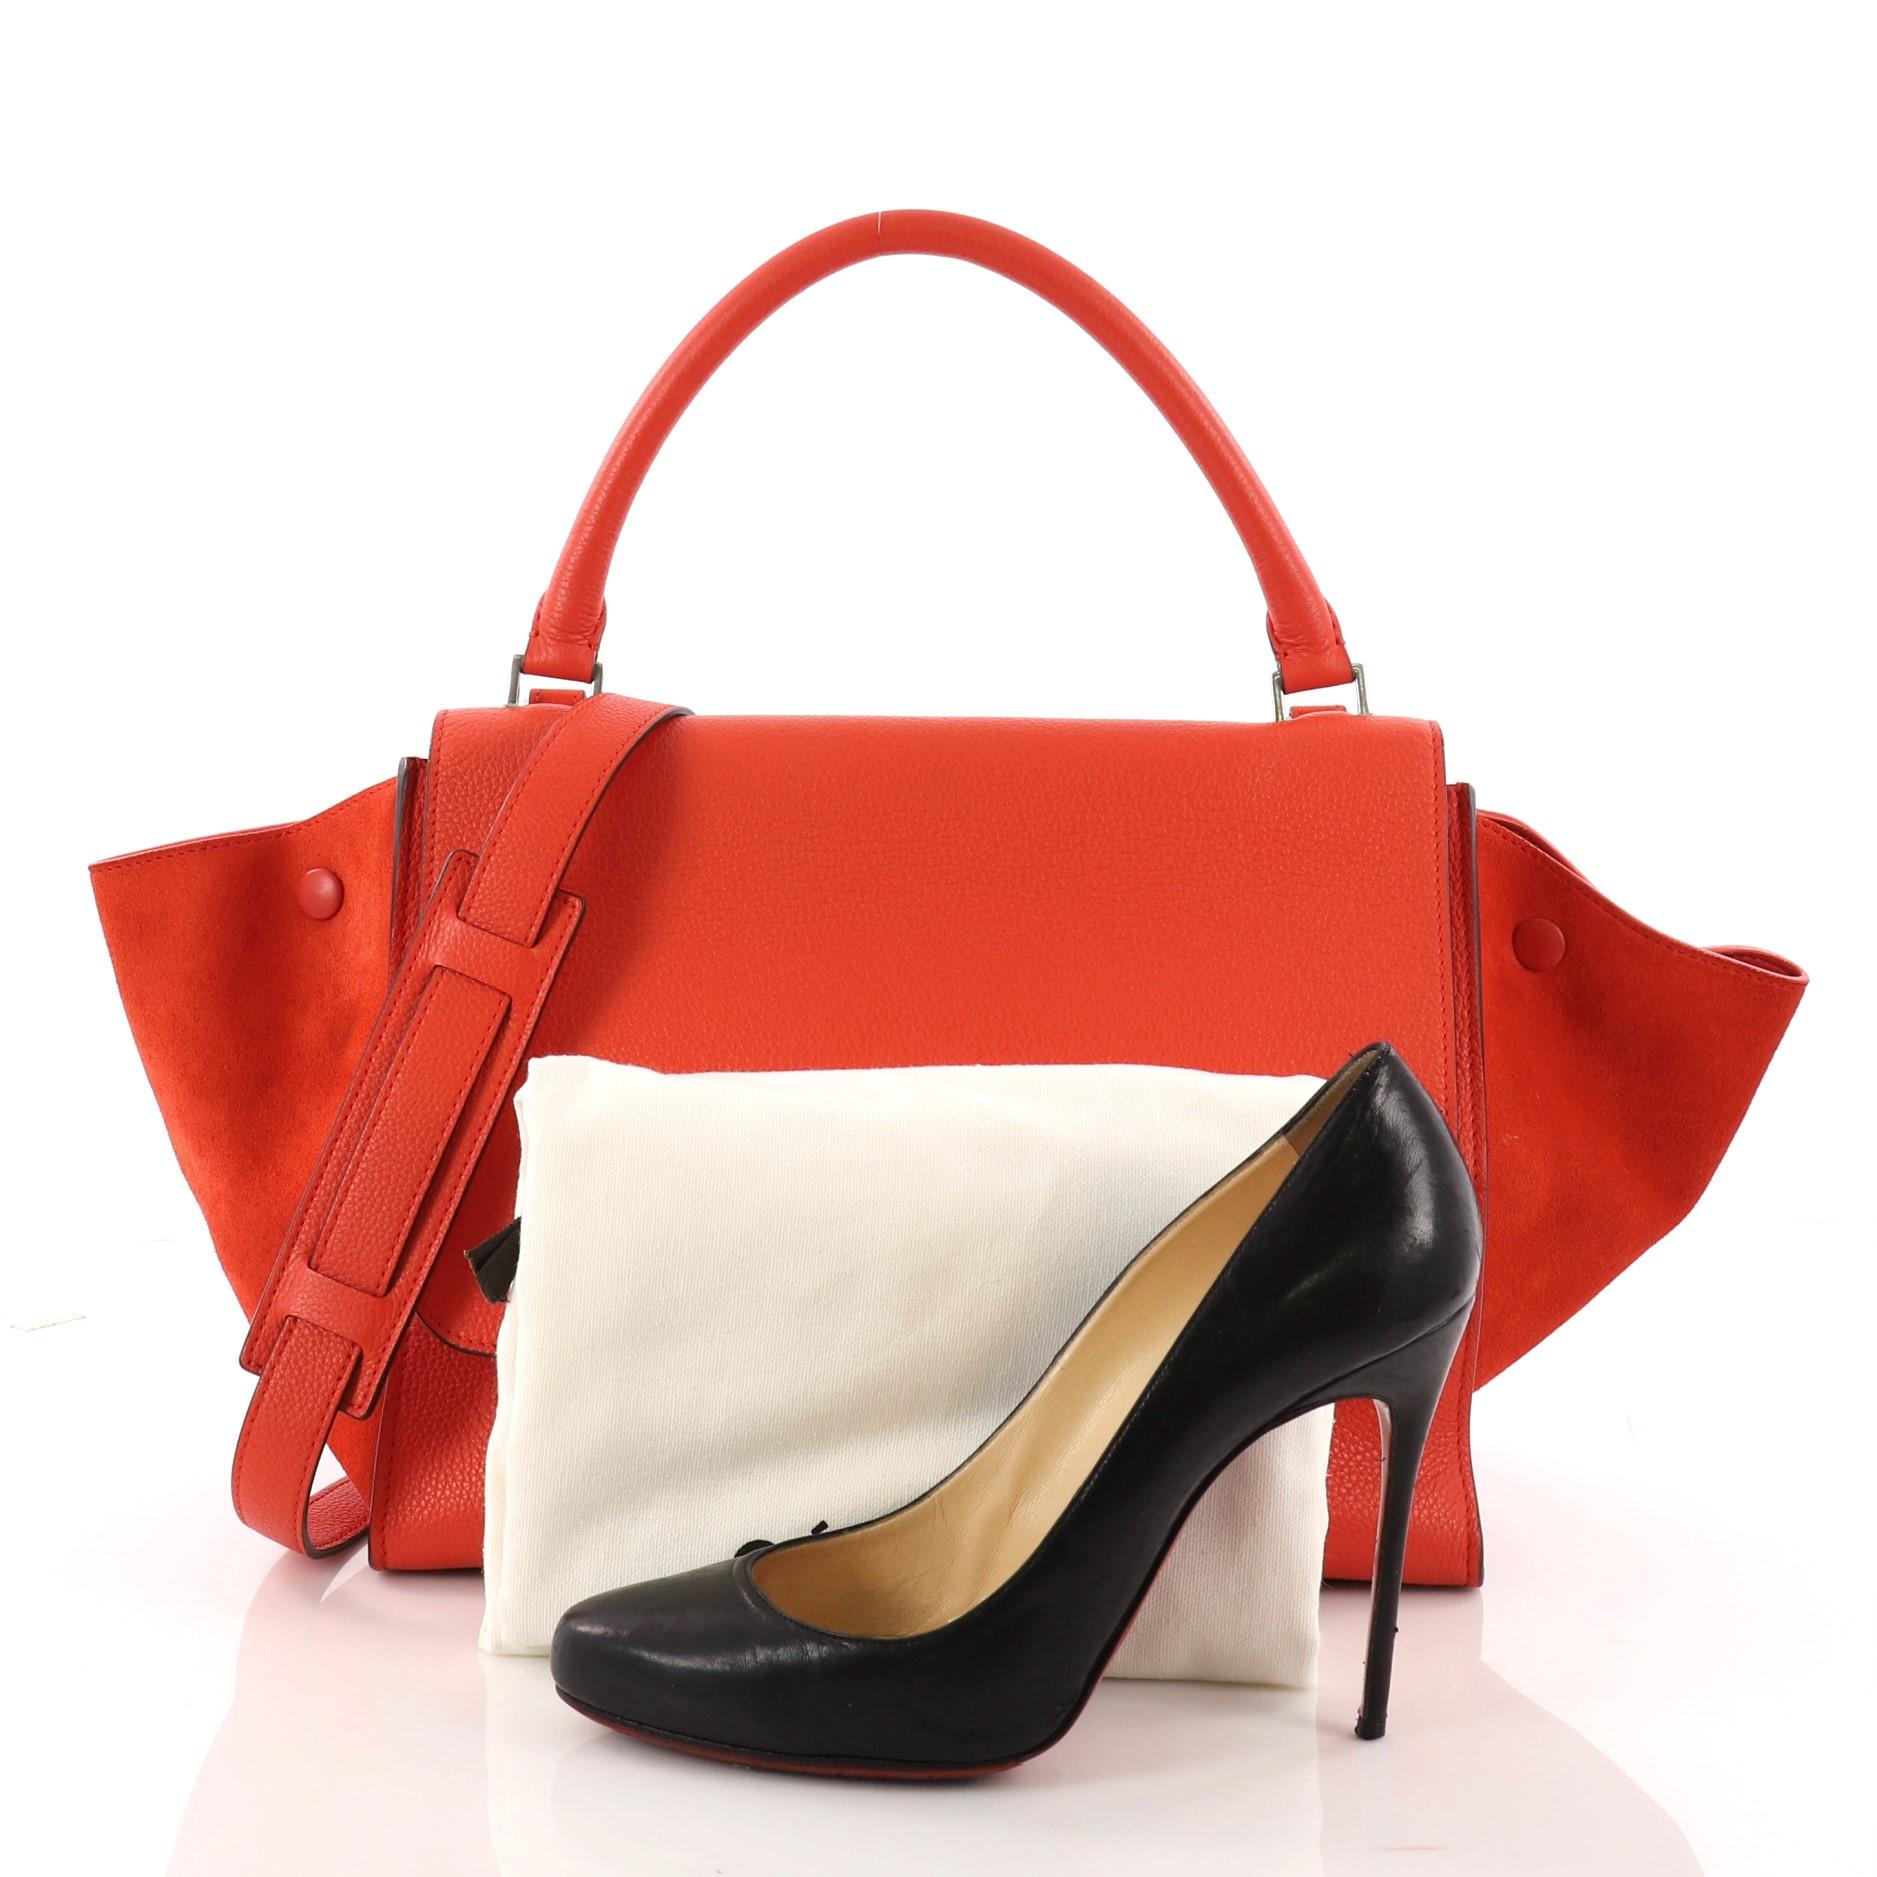 This authentic Celine Trapeze Handbag Leather Medium is a modern minimalist design with a playful twist in an array of subdued colors. Crafted from red leather, this popular bag features exterior back zip pocket, side snap closures, top looped